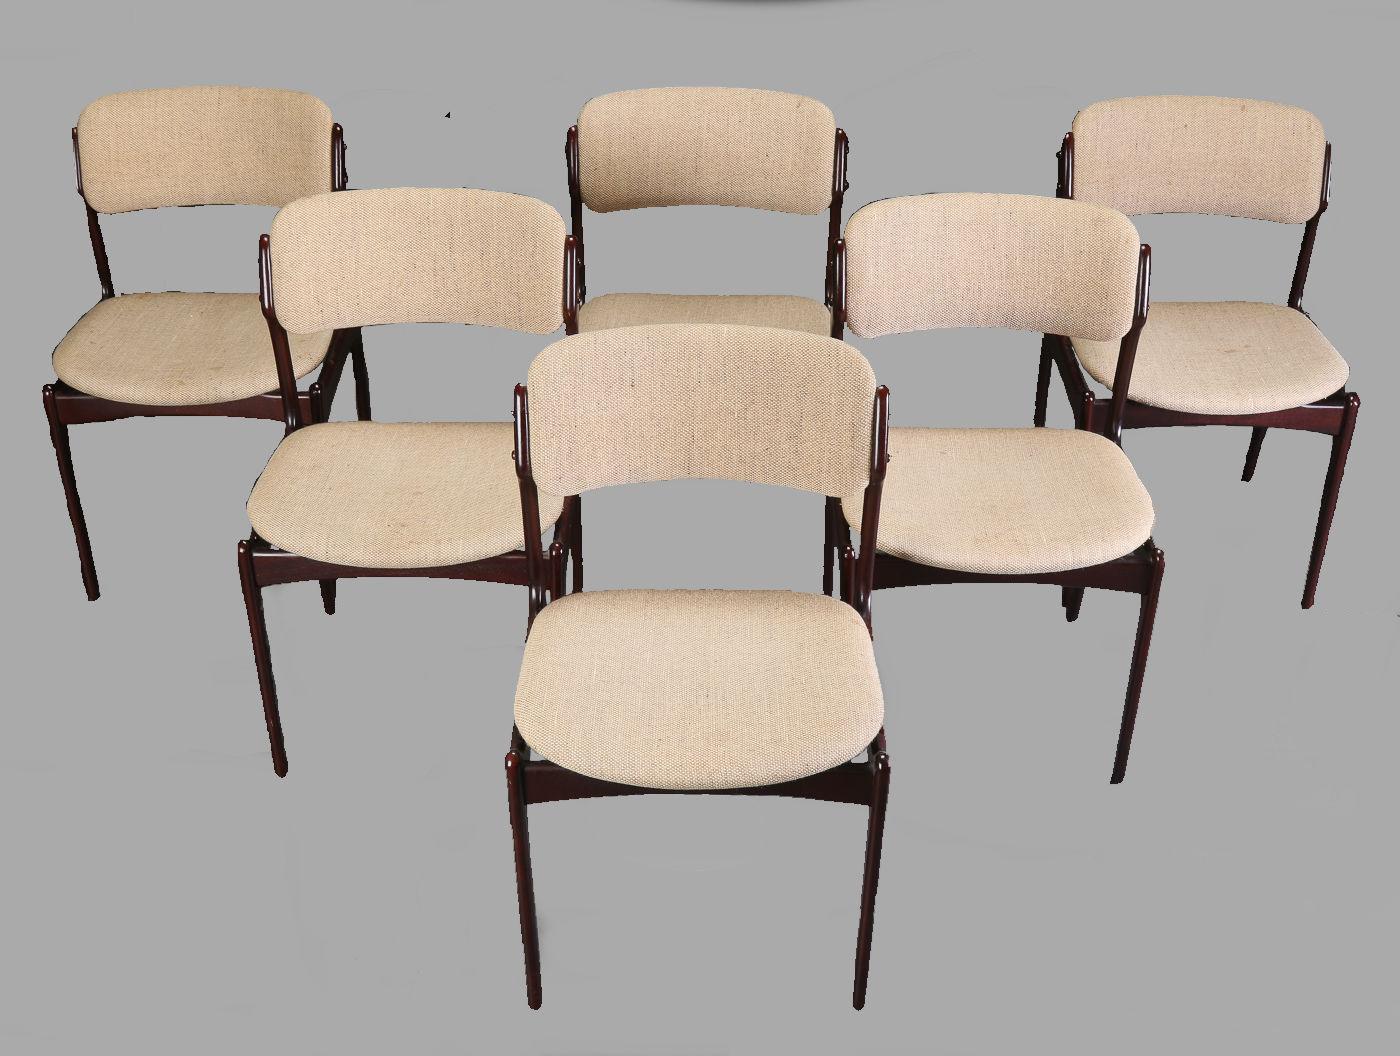 Set of six dining chairs in tanned oak with floating seat designed by Erik Buch for Oddense Maskinsnedkeri.

The chairs have a simple solid construction with elegant lines and a comfortable seating experience on the floating seat design that is